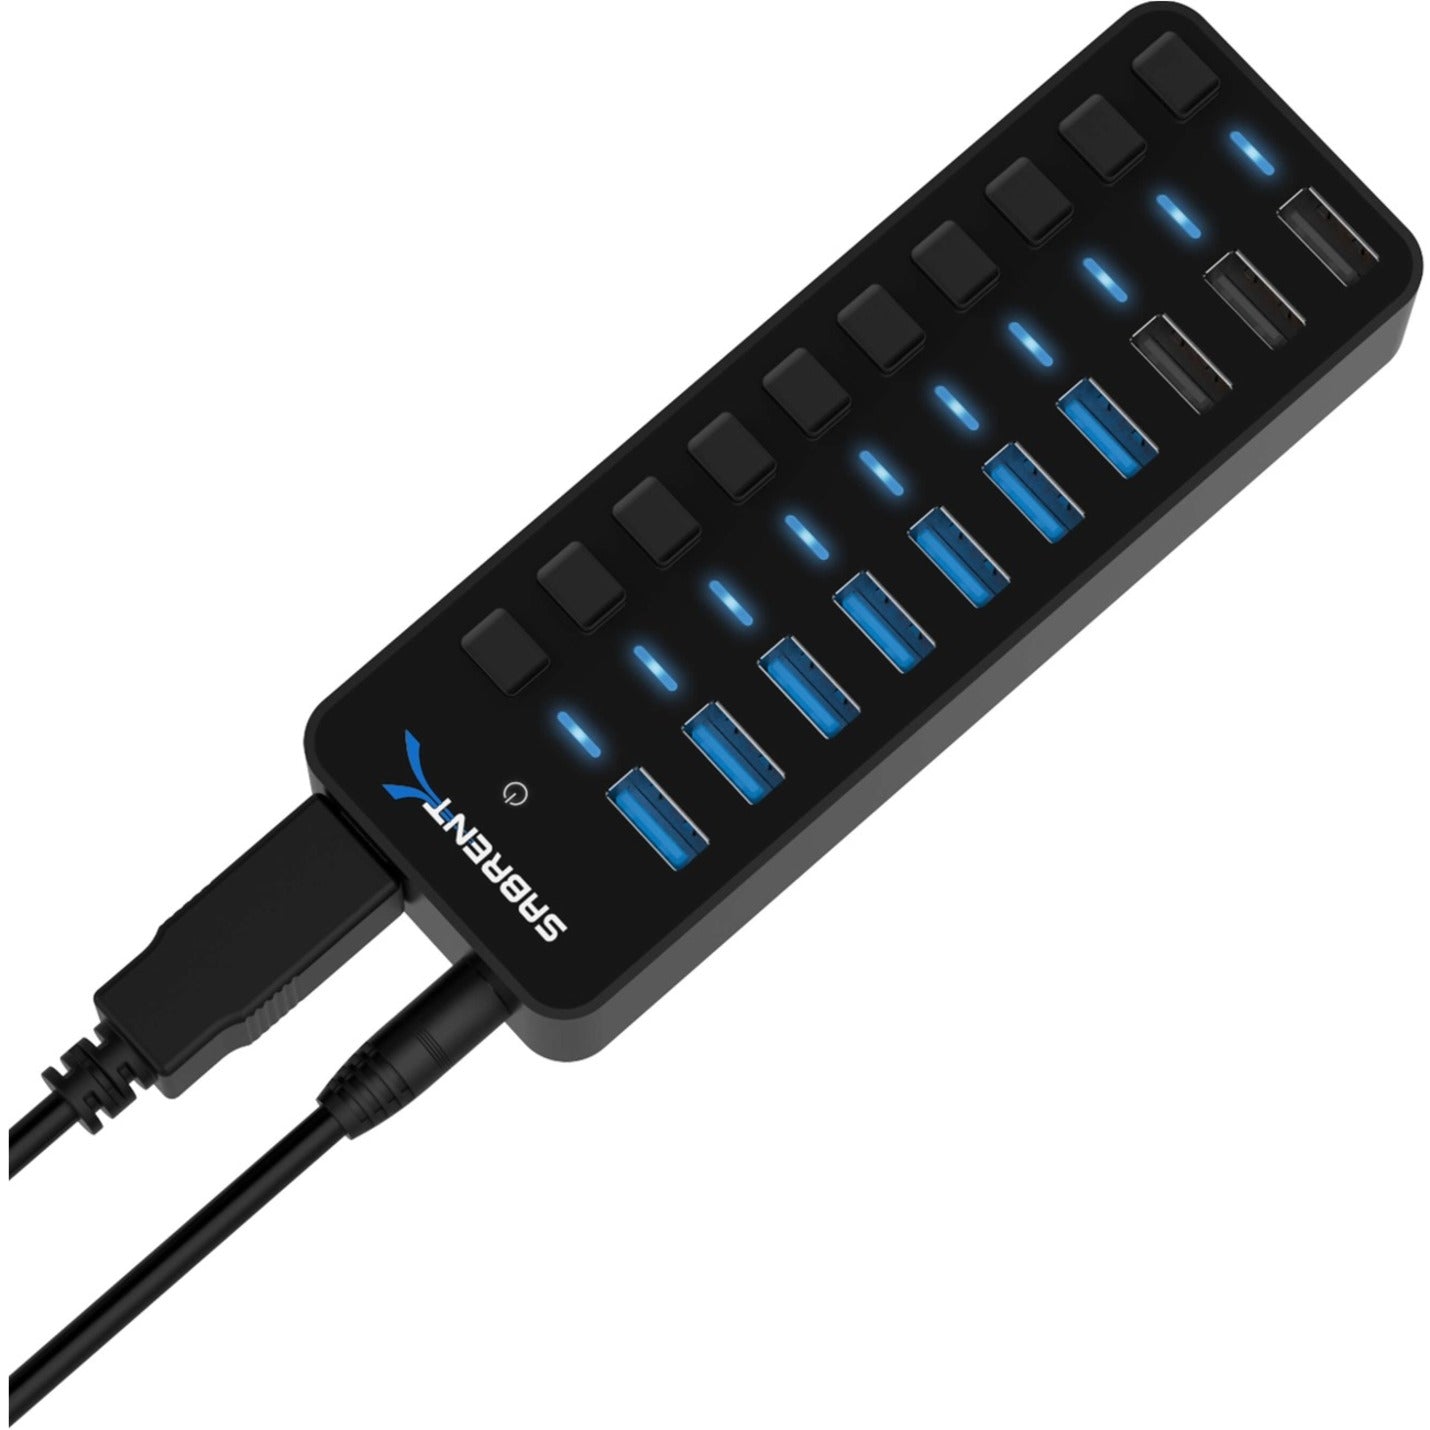 Sabrent HB-B7C3 7 USB 3.0 Port + 3 Smart Charging Ports Hub, High-Speed Data Transfer and Fast Charging for Your Devices